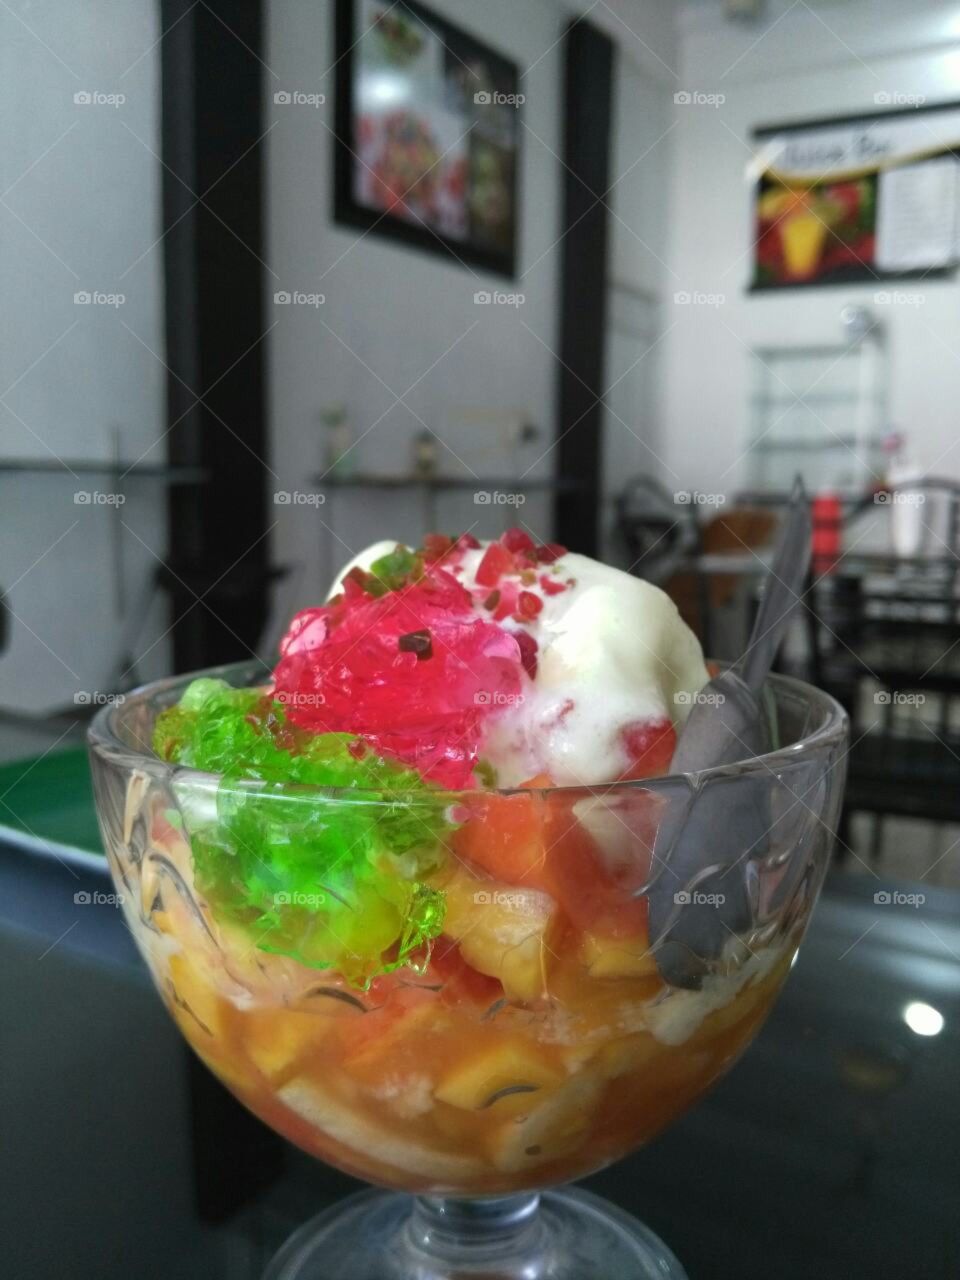 delicious fruit salad with ice cream